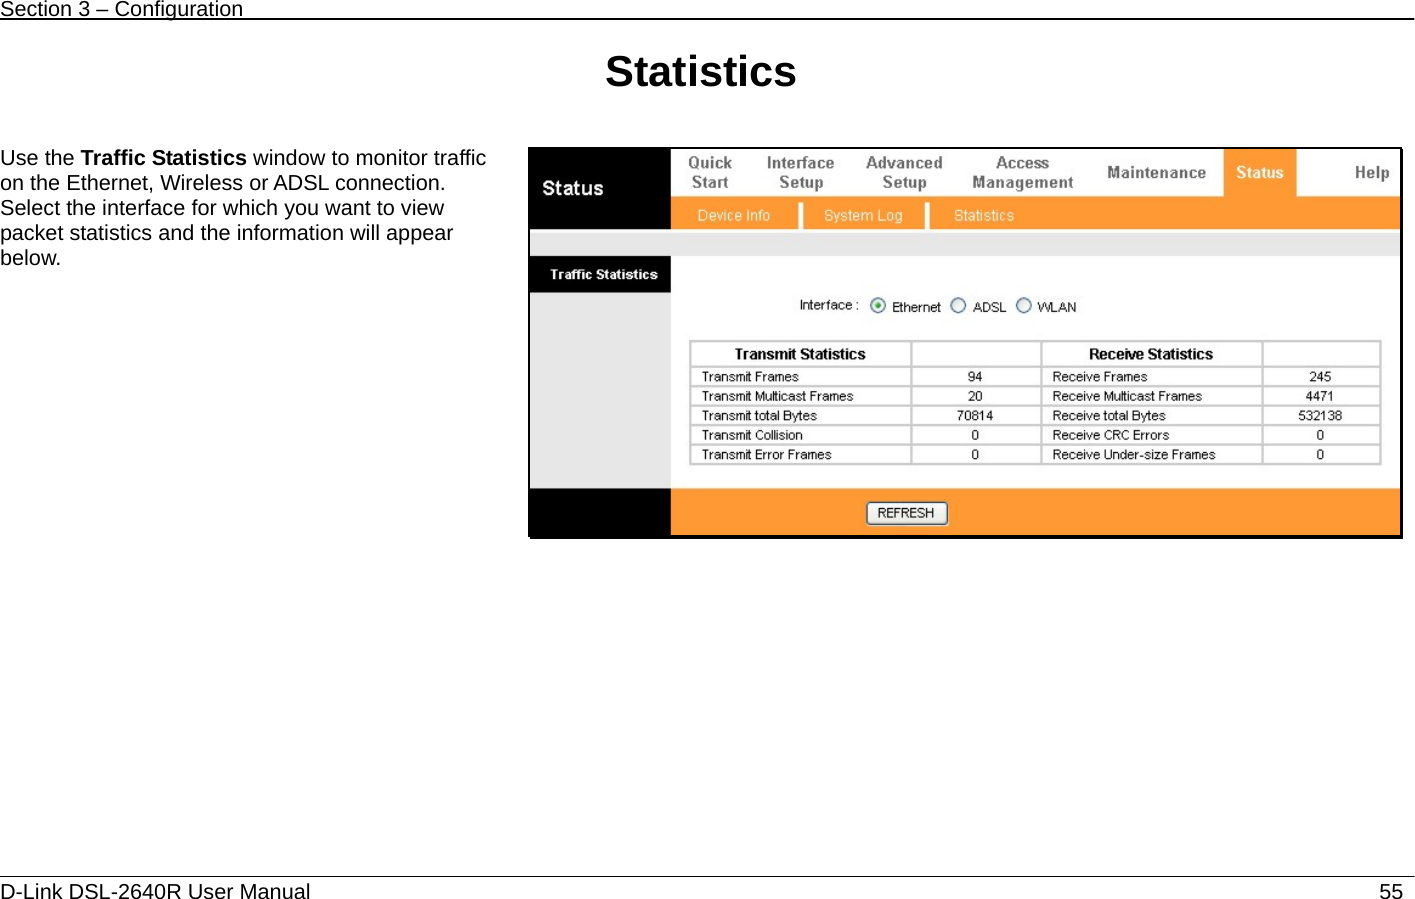 Section 3 – Configuration   D-Link DSL-2640R User Manual                           55Statistics   Use the Traffic Statistics window to monitor traffic on the Ethernet, Wireless or ADSL connection. Select the interface for which you want to view packet statistics and the information will appear below.    